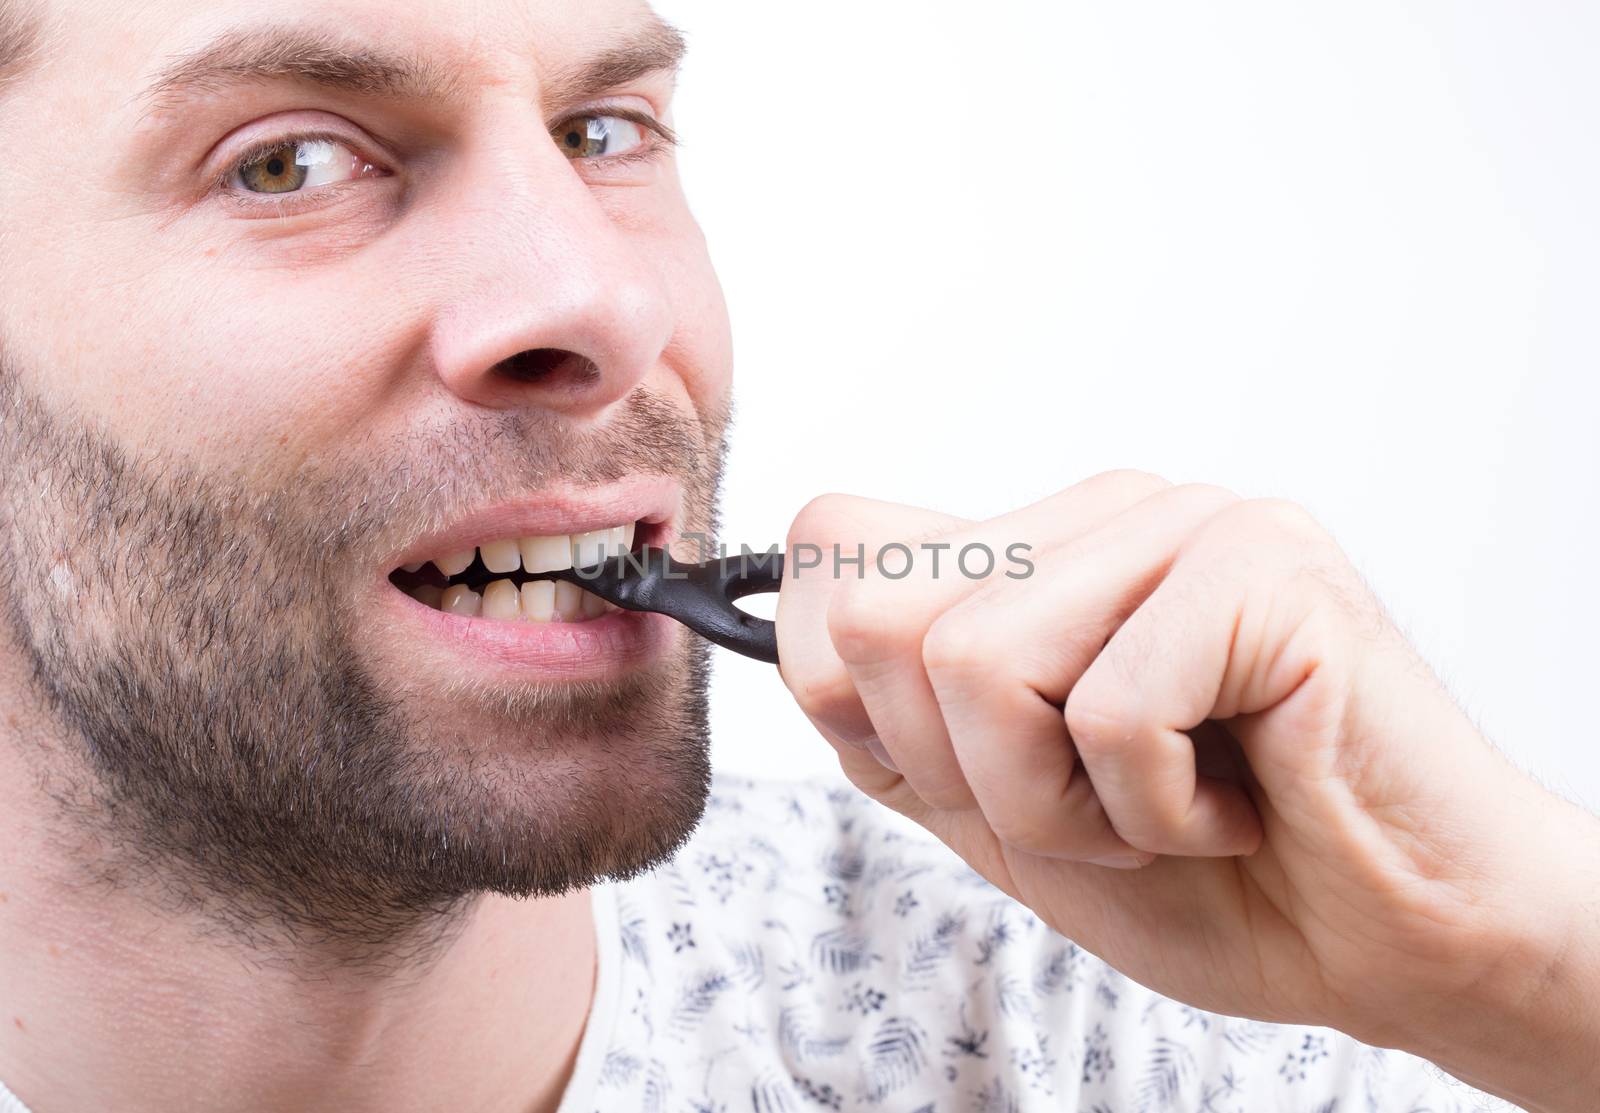 Man eating typicaly dutch candy called 'Dropsleutel' (candy key) - Isolated